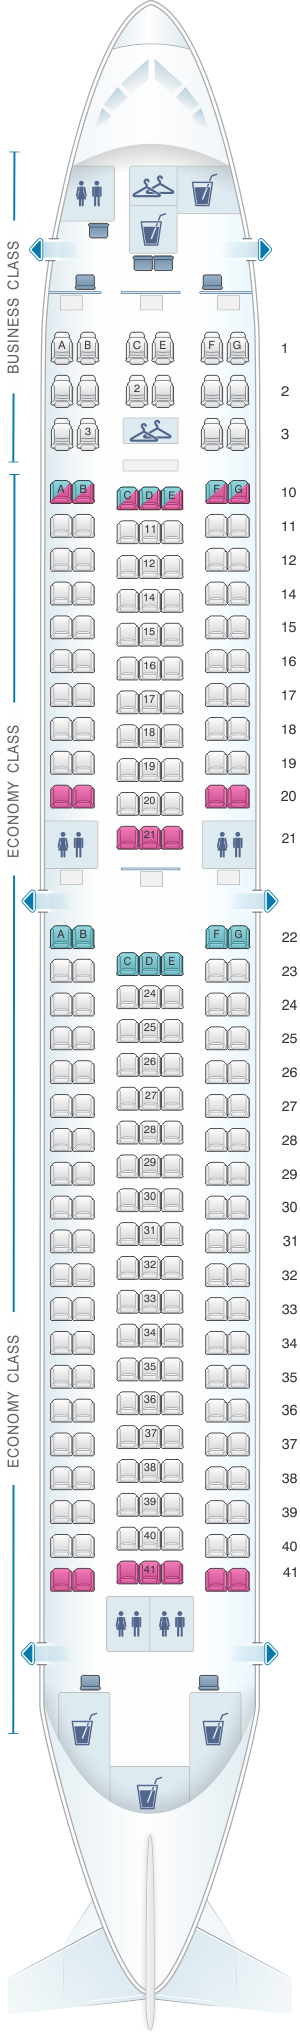 Seat map for Transaero Airlines Boeing B767 200 Config. 3